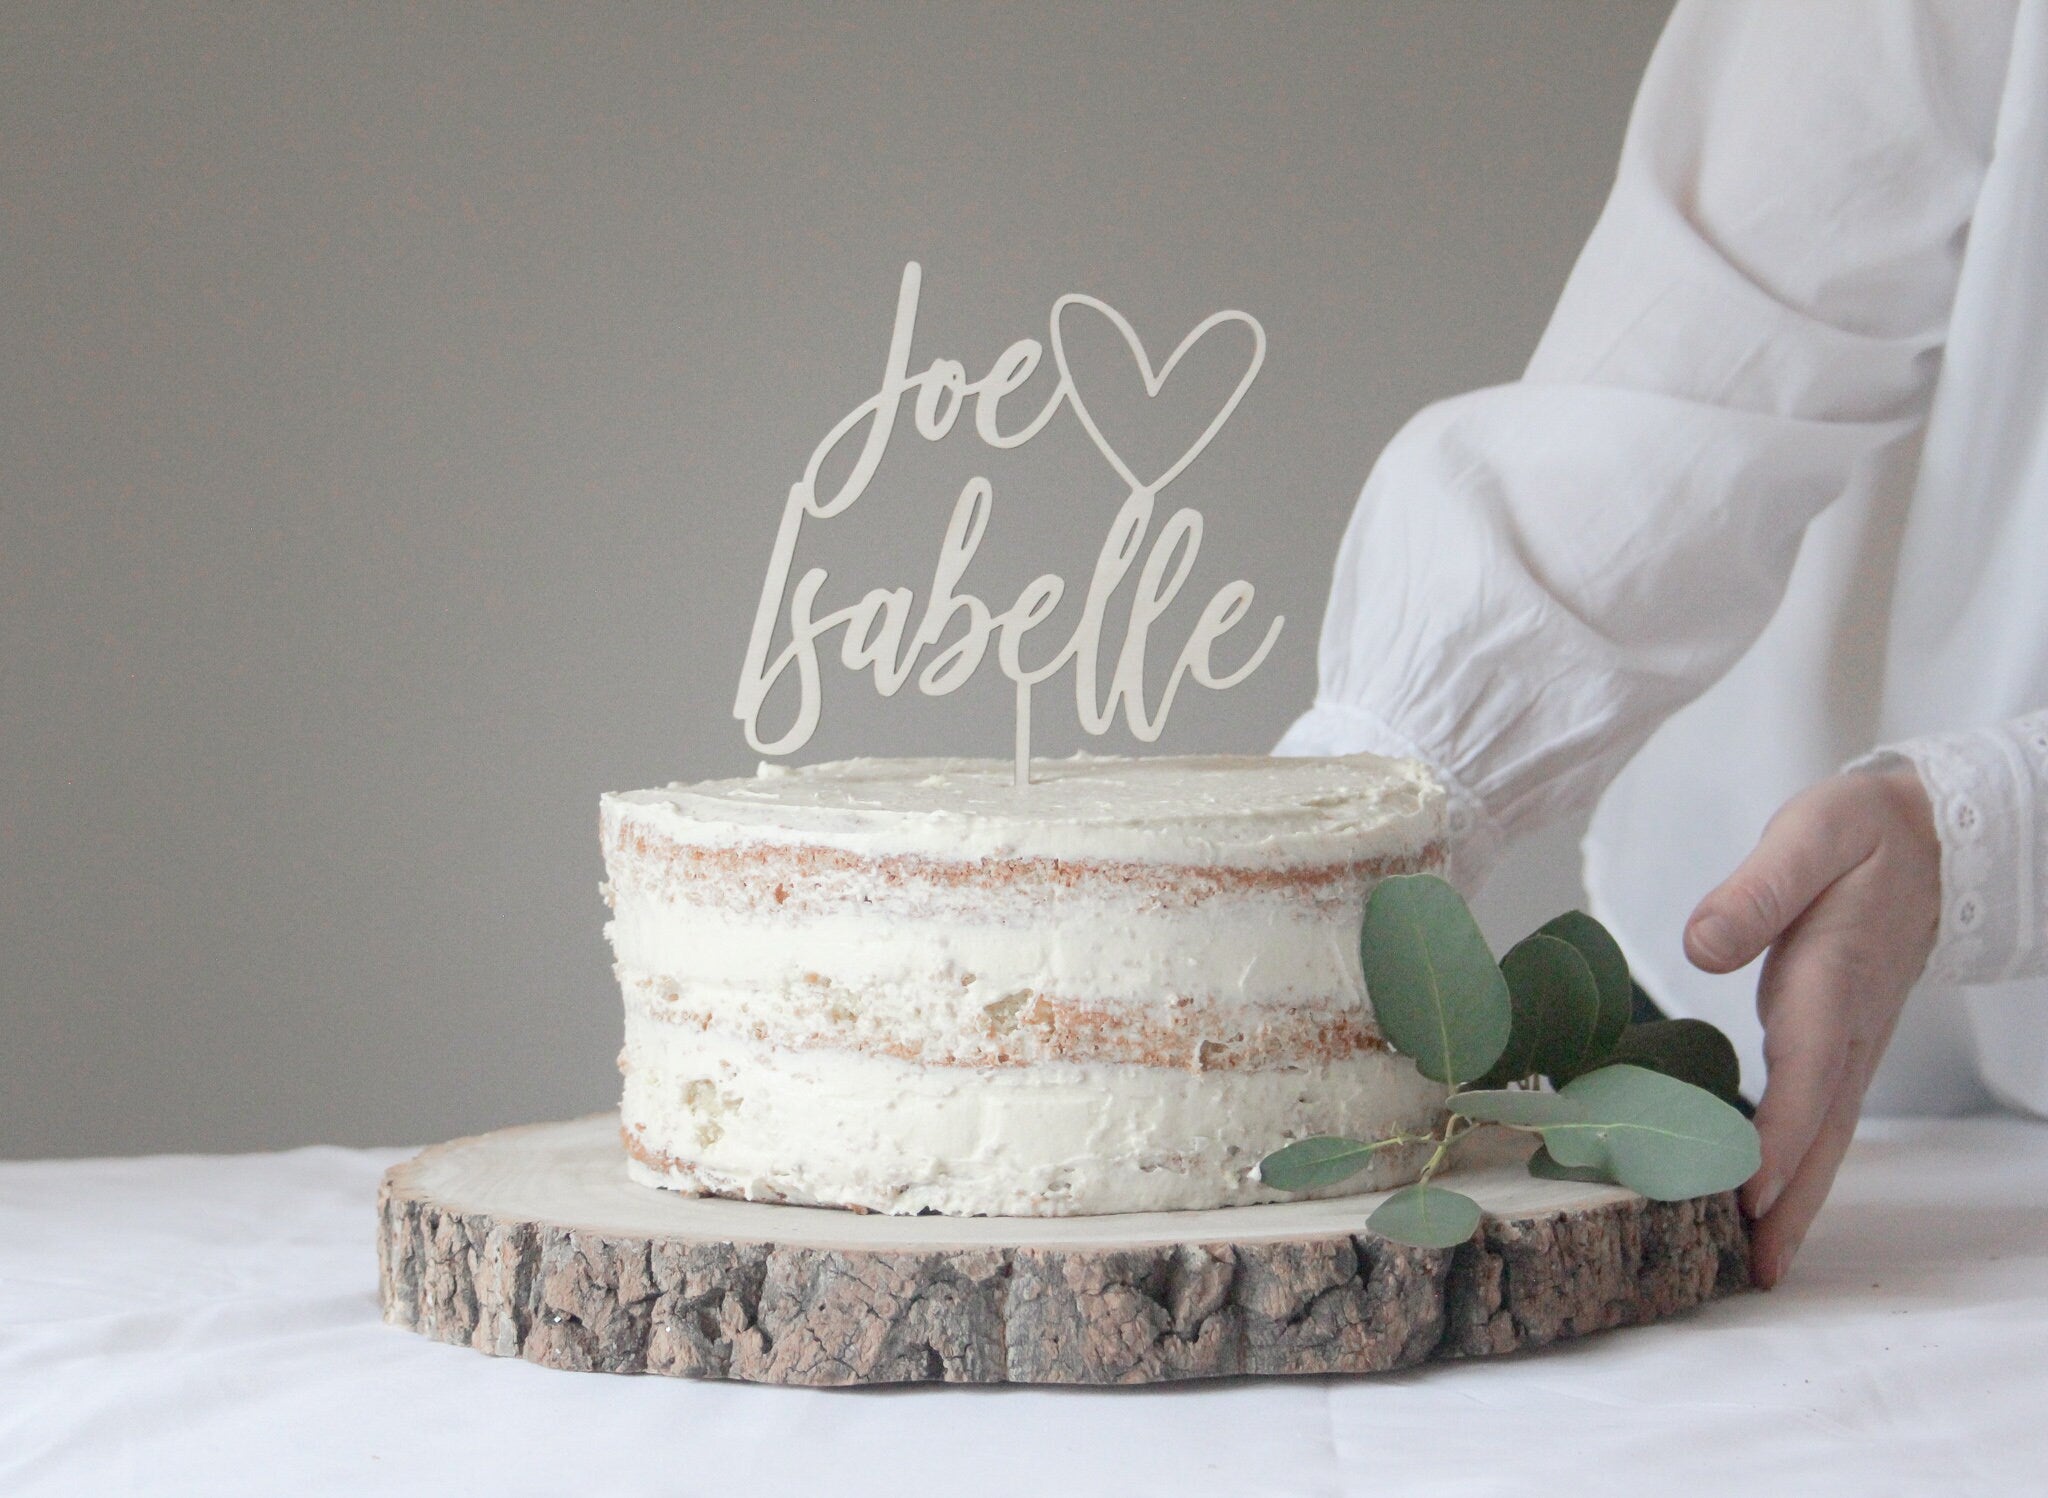 Wedding Cake Topper With Heart And First Names, Heart Topper